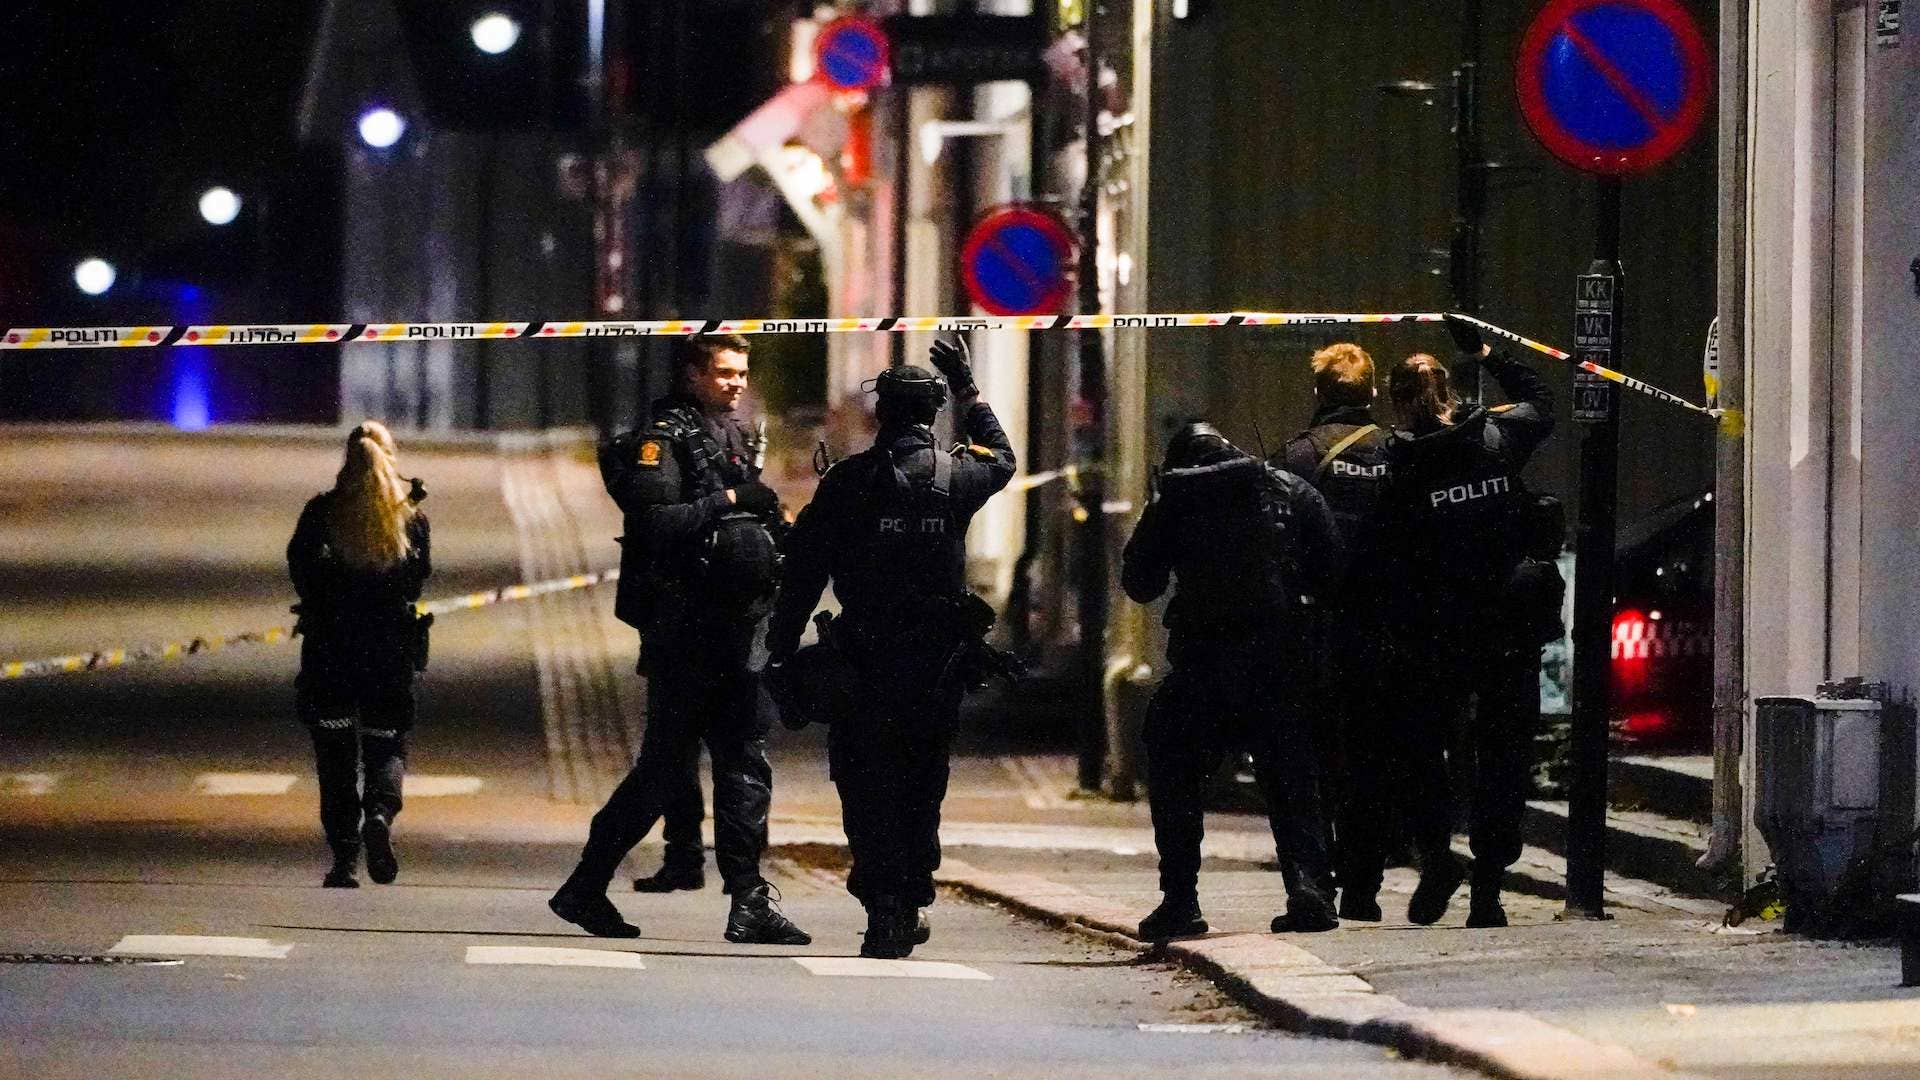 Photograph of Norway police at scene